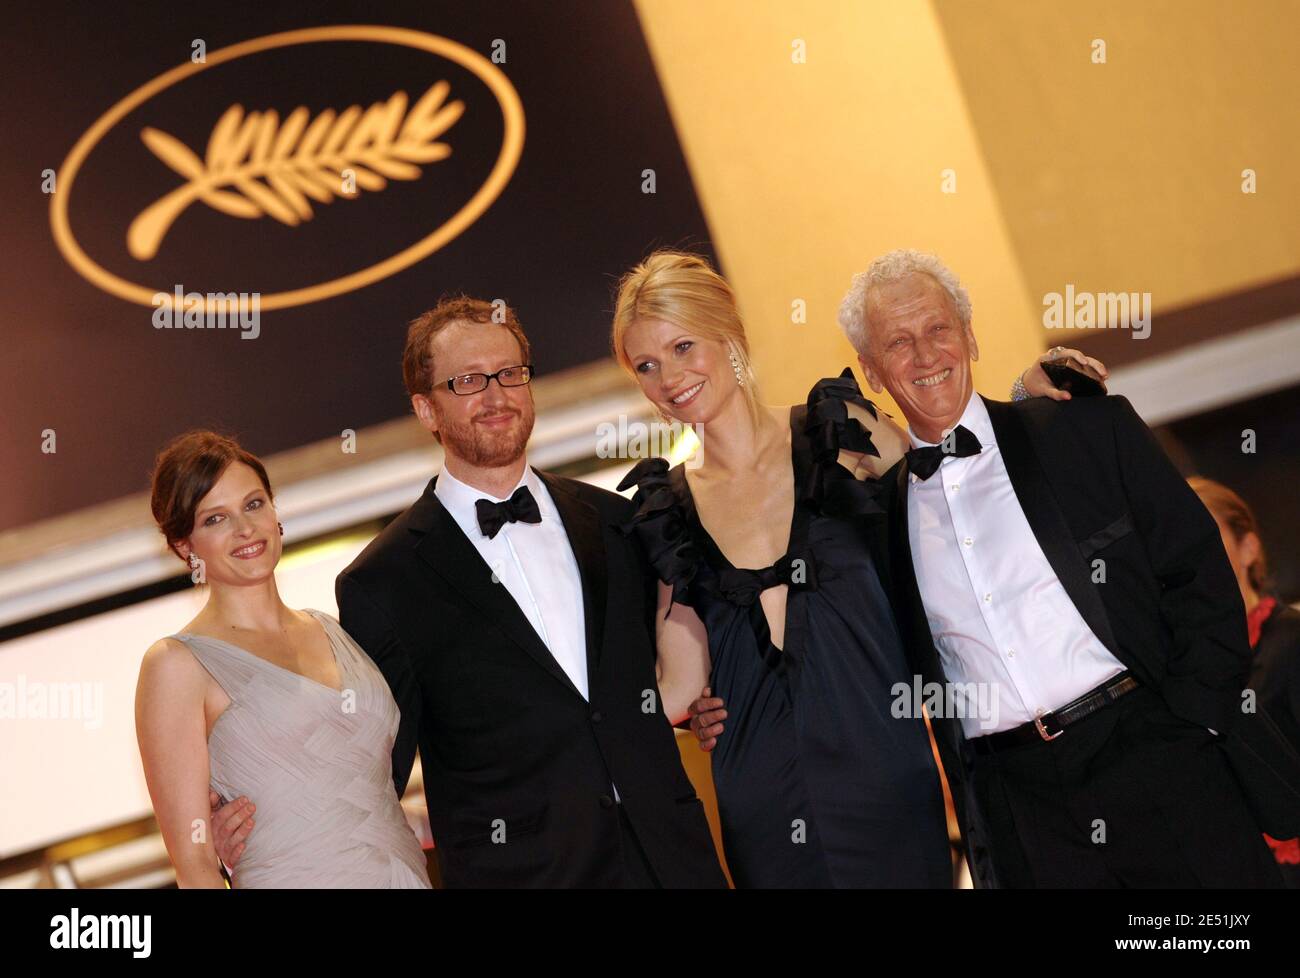 Vinessa Shaw, director James Gray, Gwyneth Paltrow and Moshonov Moni arriving at the Palais des Festivals in Cannes, Southern France, May 19, 2008, for the screening of James Gray's Two Lovers presented in competition at the 61st Cannes Film Festival. Photo by Hahn-Nebinger-Orban/ABACAPRESS.COM Stock Photo